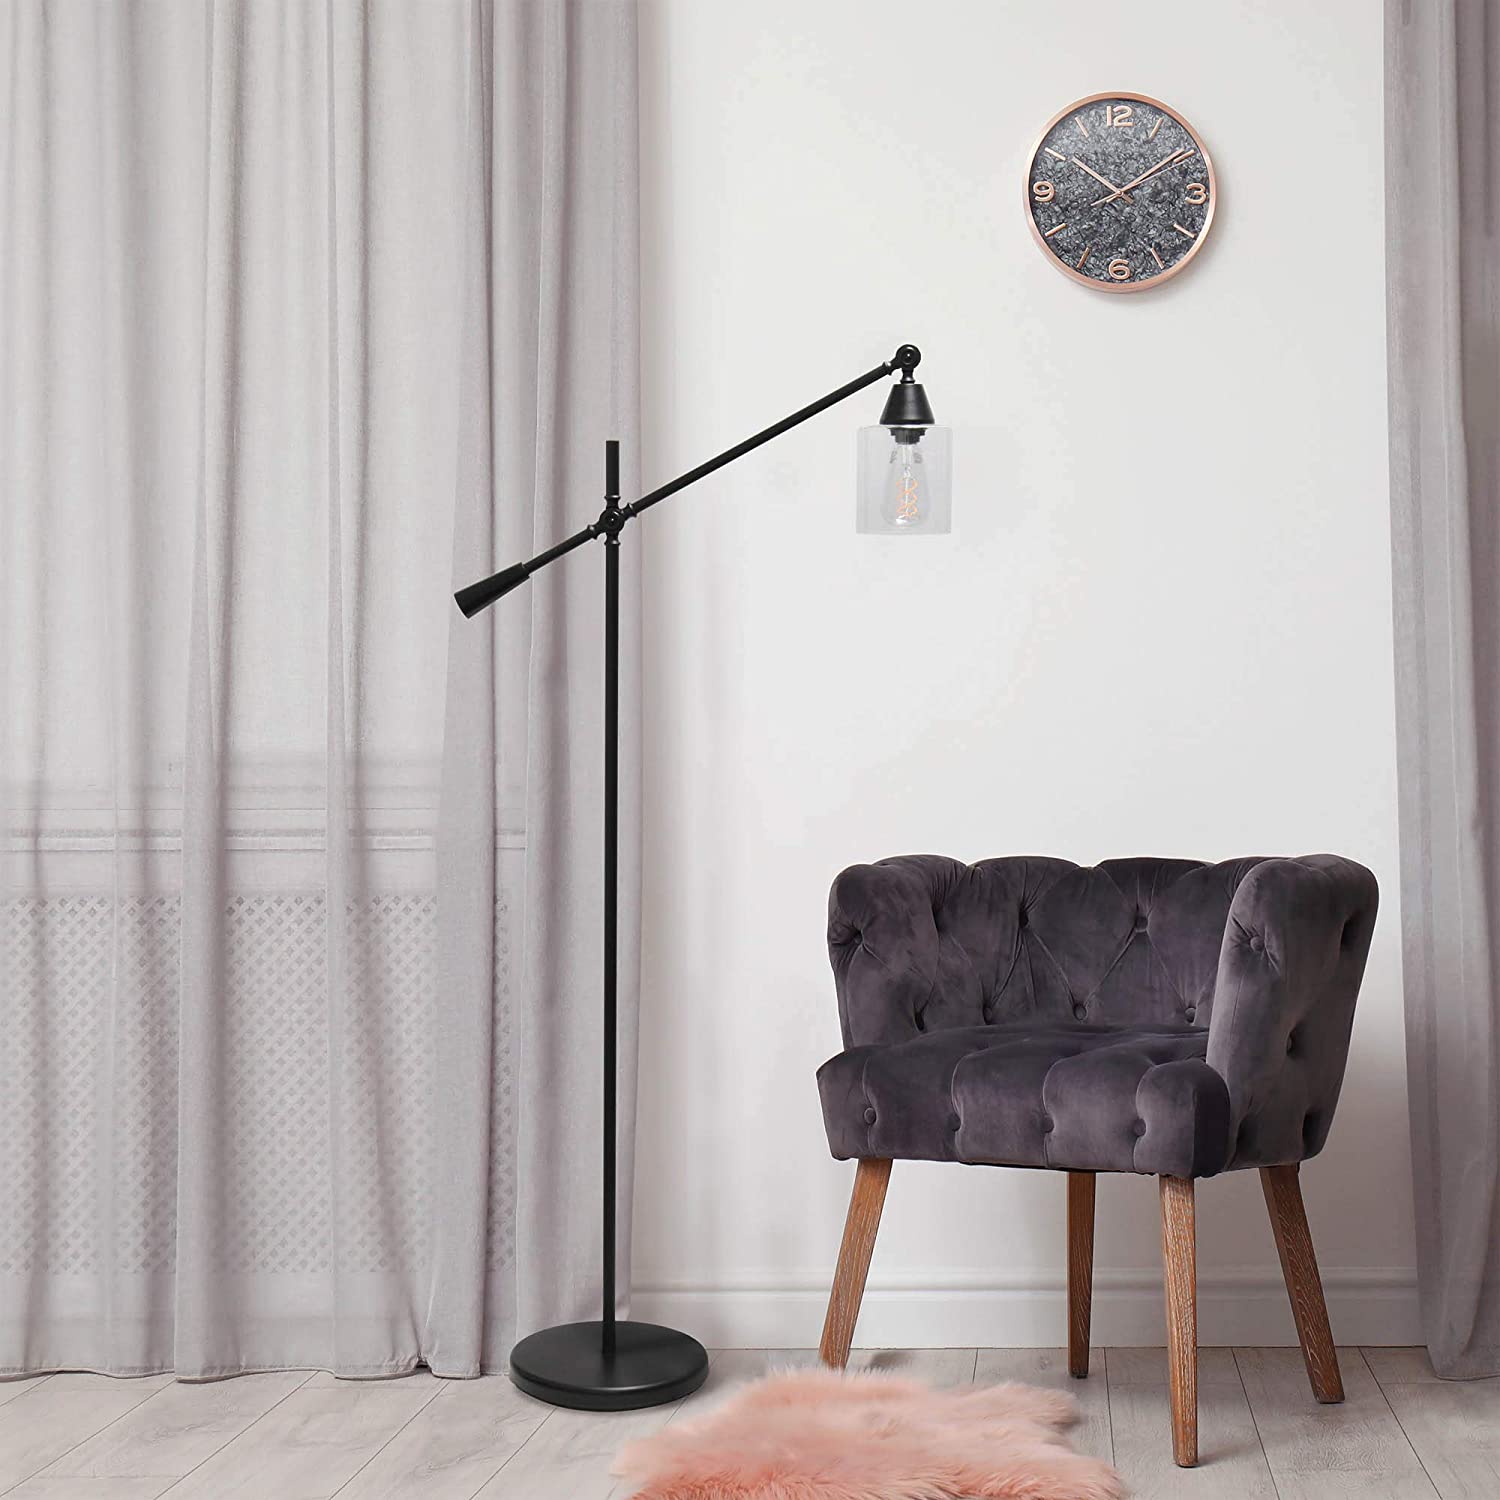 Lalia Home Decorative Swing Arm Floor Lamp with Clear Glass Cylindrical Shade, Black